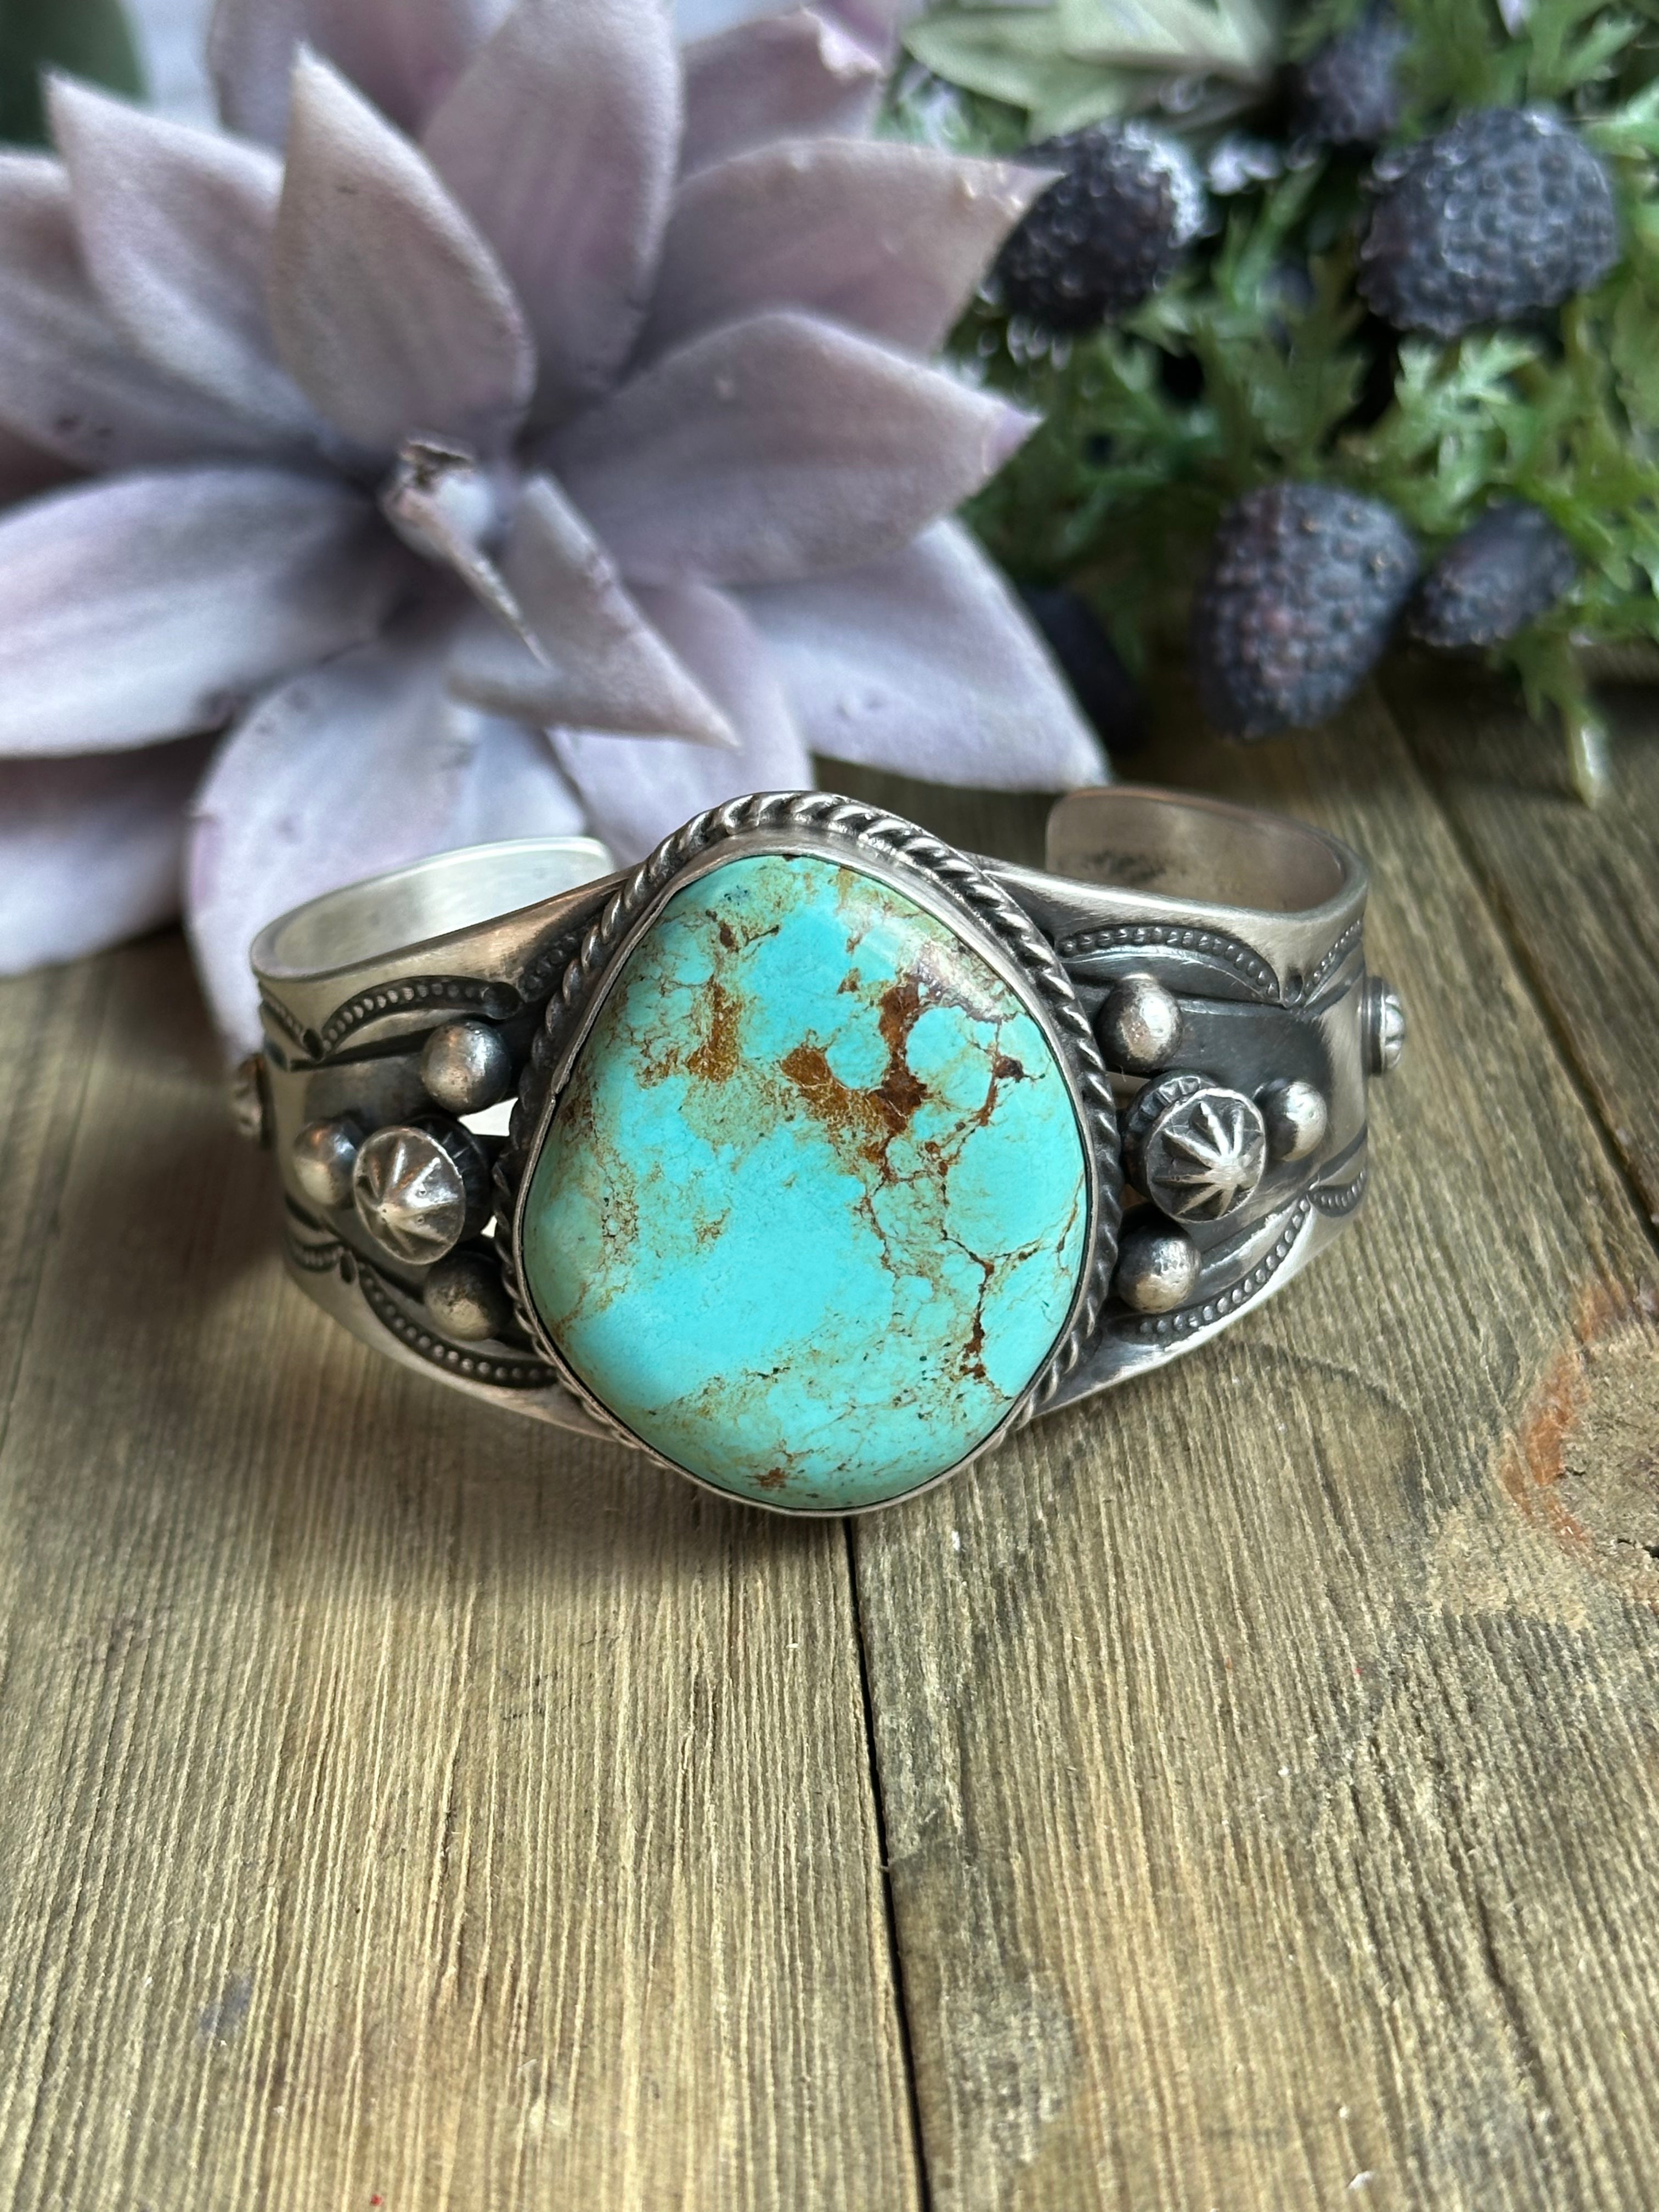 Chimney Butte #8 Turquoise & Sterling Silver Cuff Bracelet